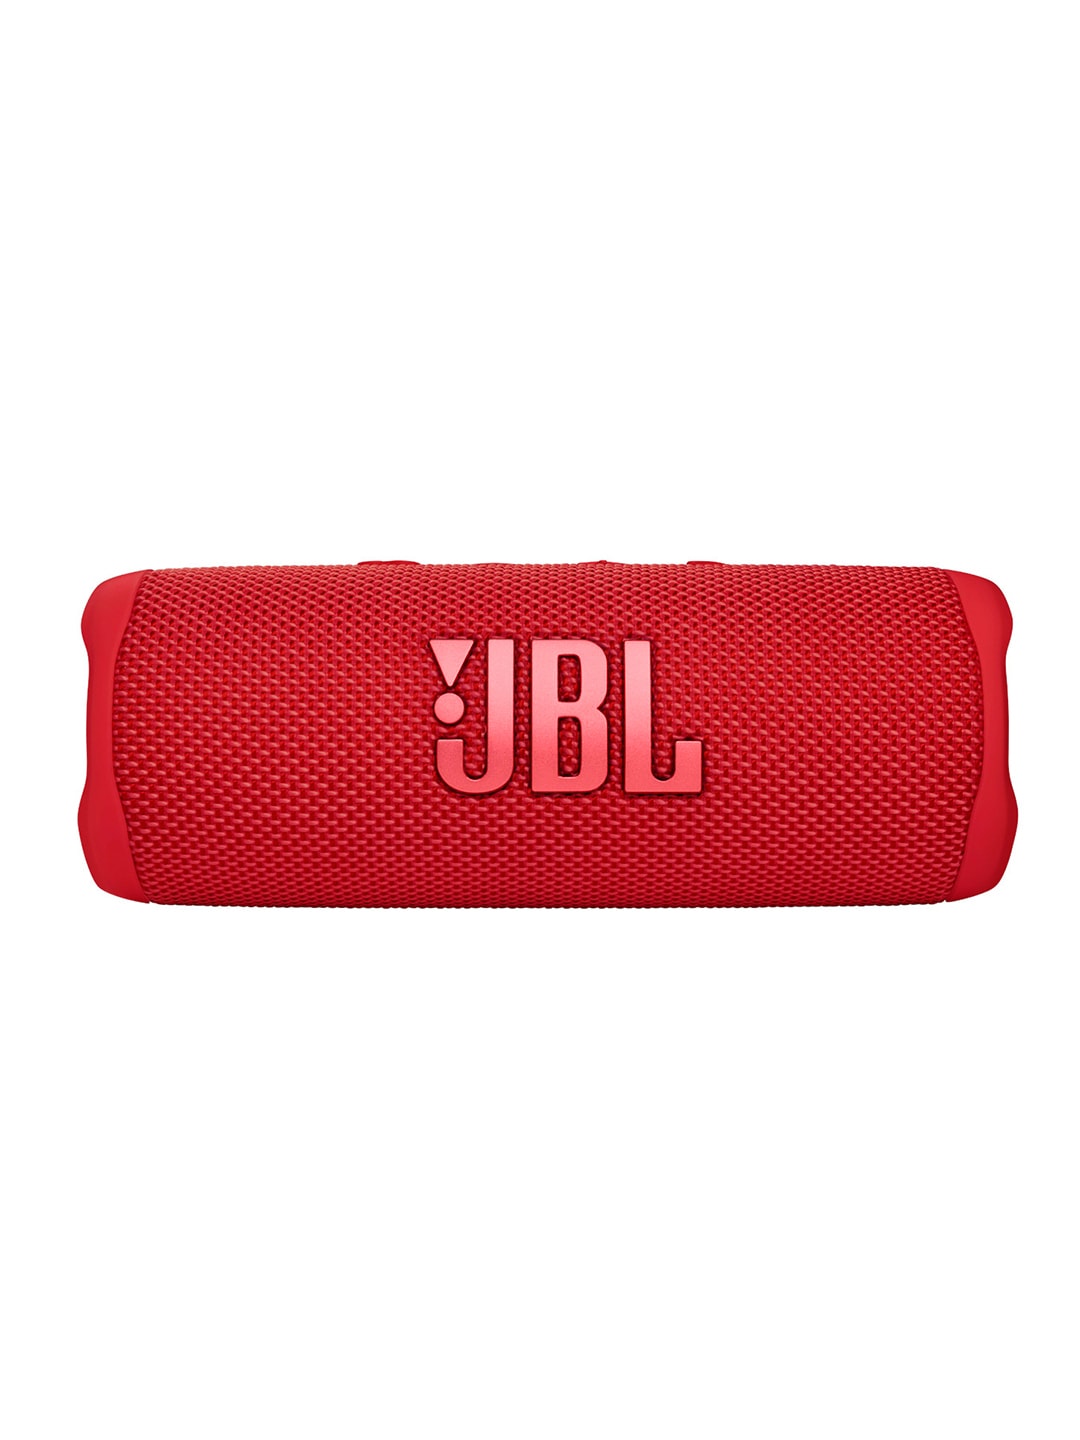 JBL Flip 6 Wireless Portable Bluetooth Speaker Without Mic - Red Price in India